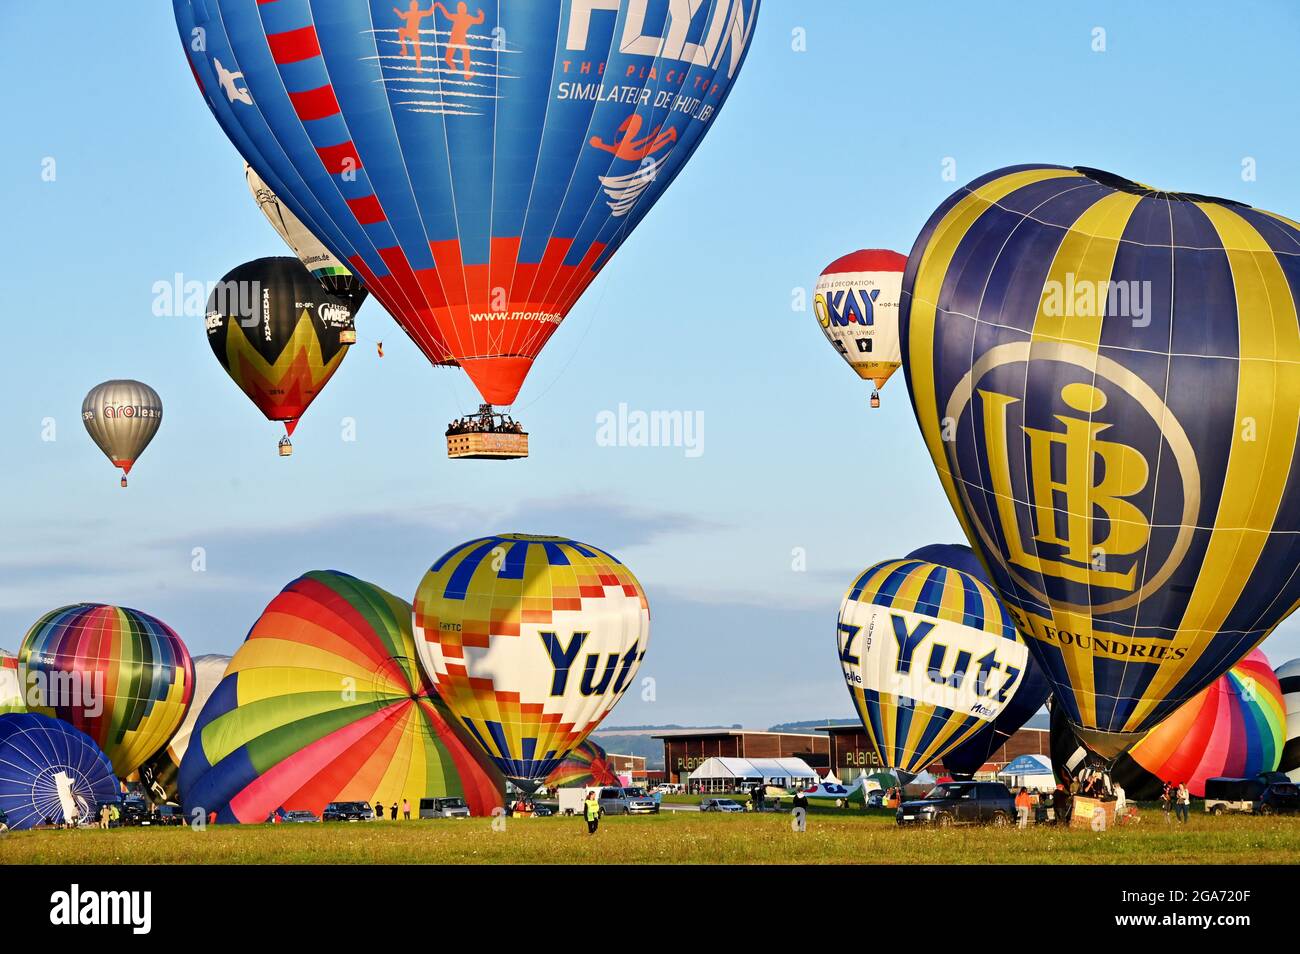 The Mondial Air Ballons hot-air balloon gathering, at Chambley aerodrome,  Hageville, France on July 29, 2021. Photo by Gisselbrecht  P/ANDBZ/ABACAPRESS.COM Stock Photo - Alamy